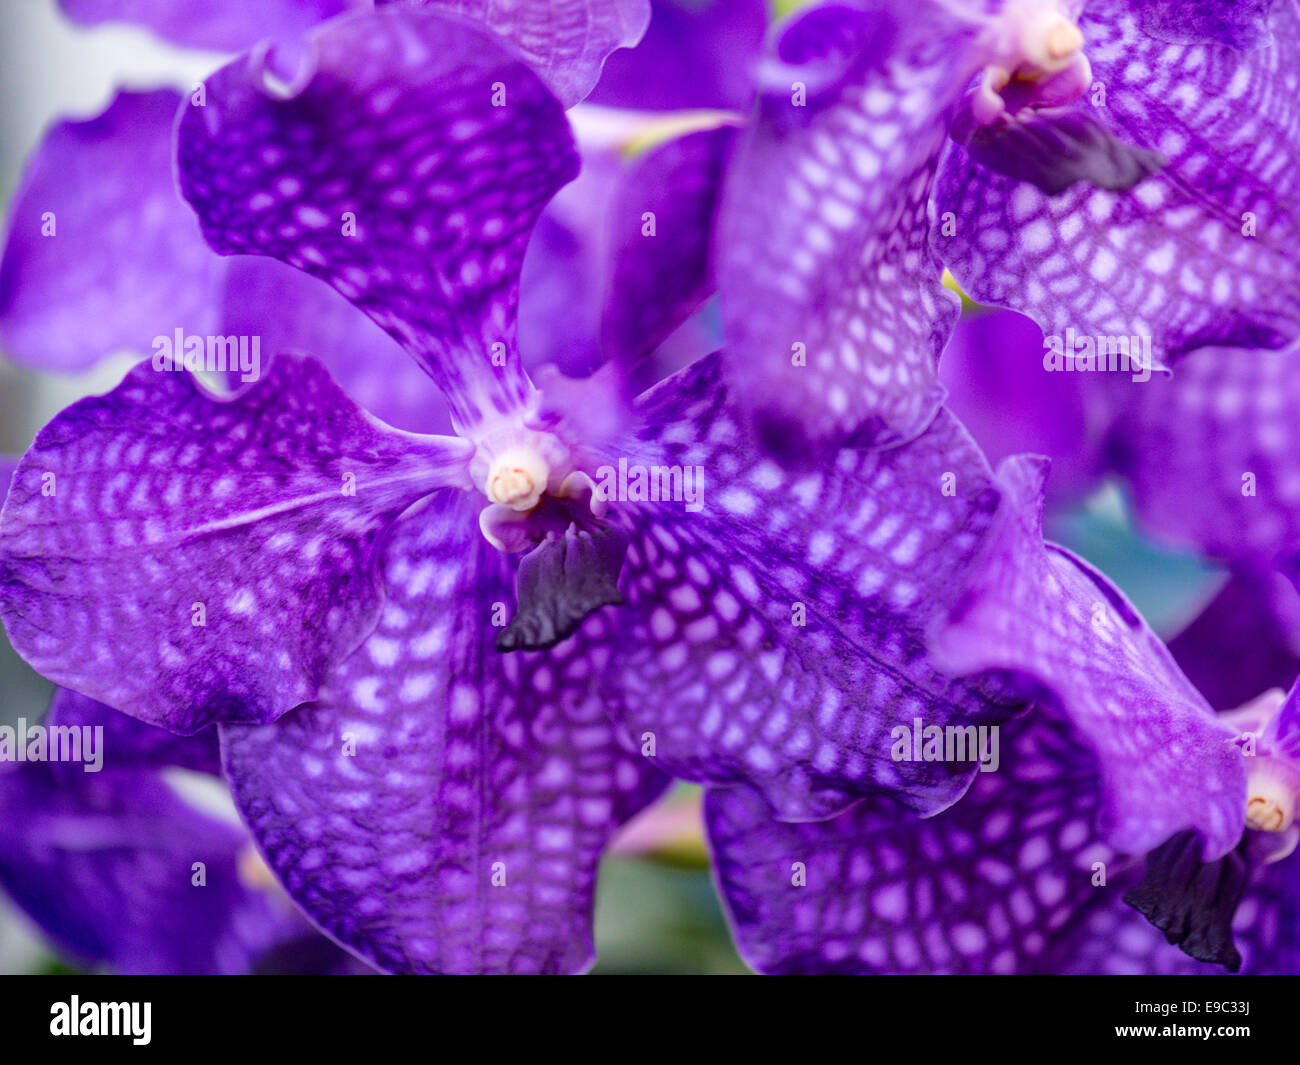 Orchid purple with speckled white petals. Stock Photo